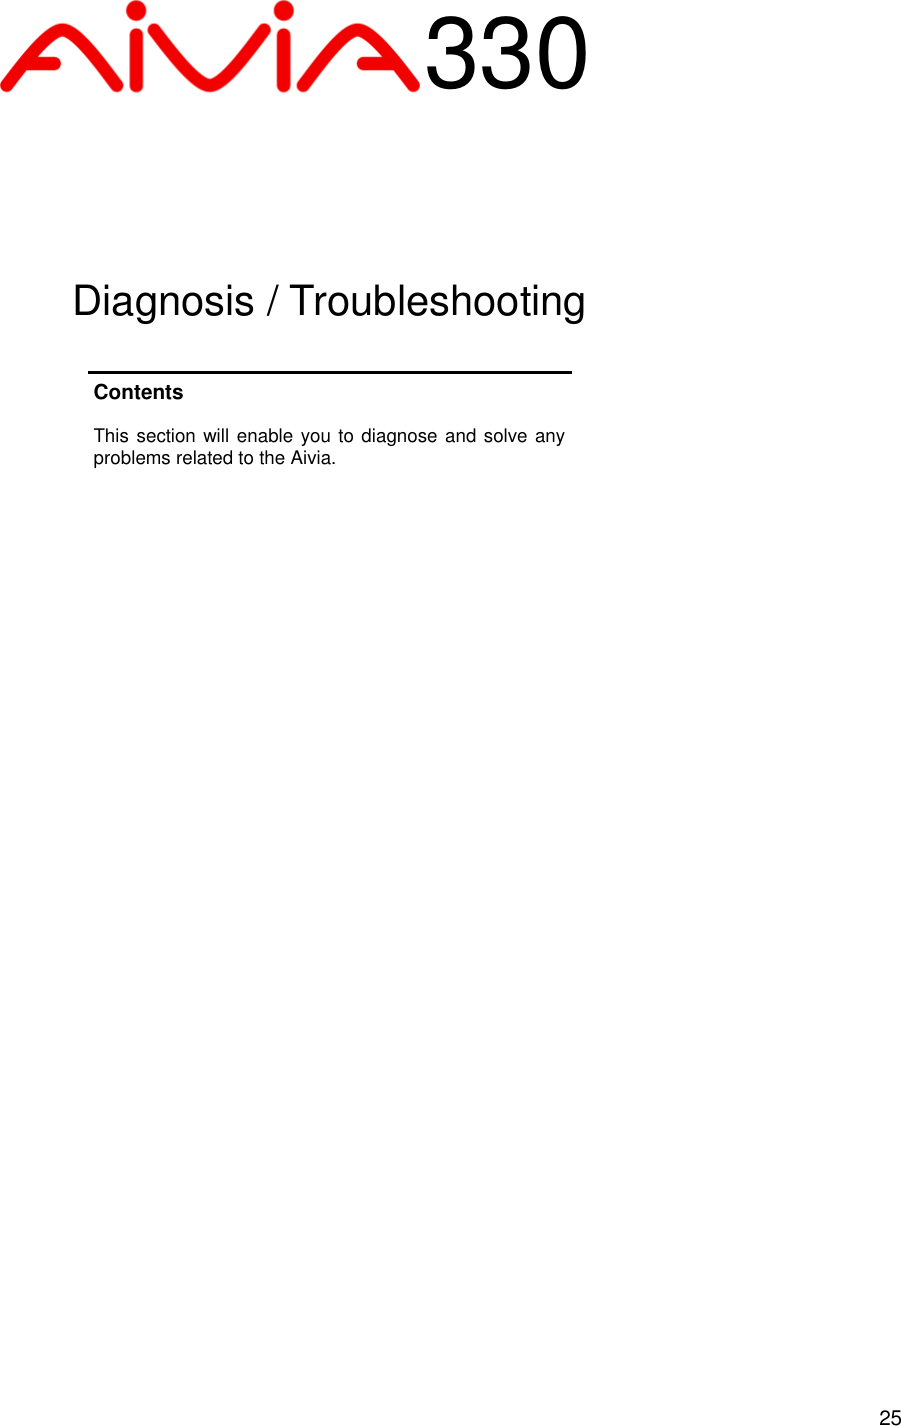  25 Contents  This section will enable you to diagnose and solve any problems related to the Aivia. 330 Diagnosis / Troubleshooting 